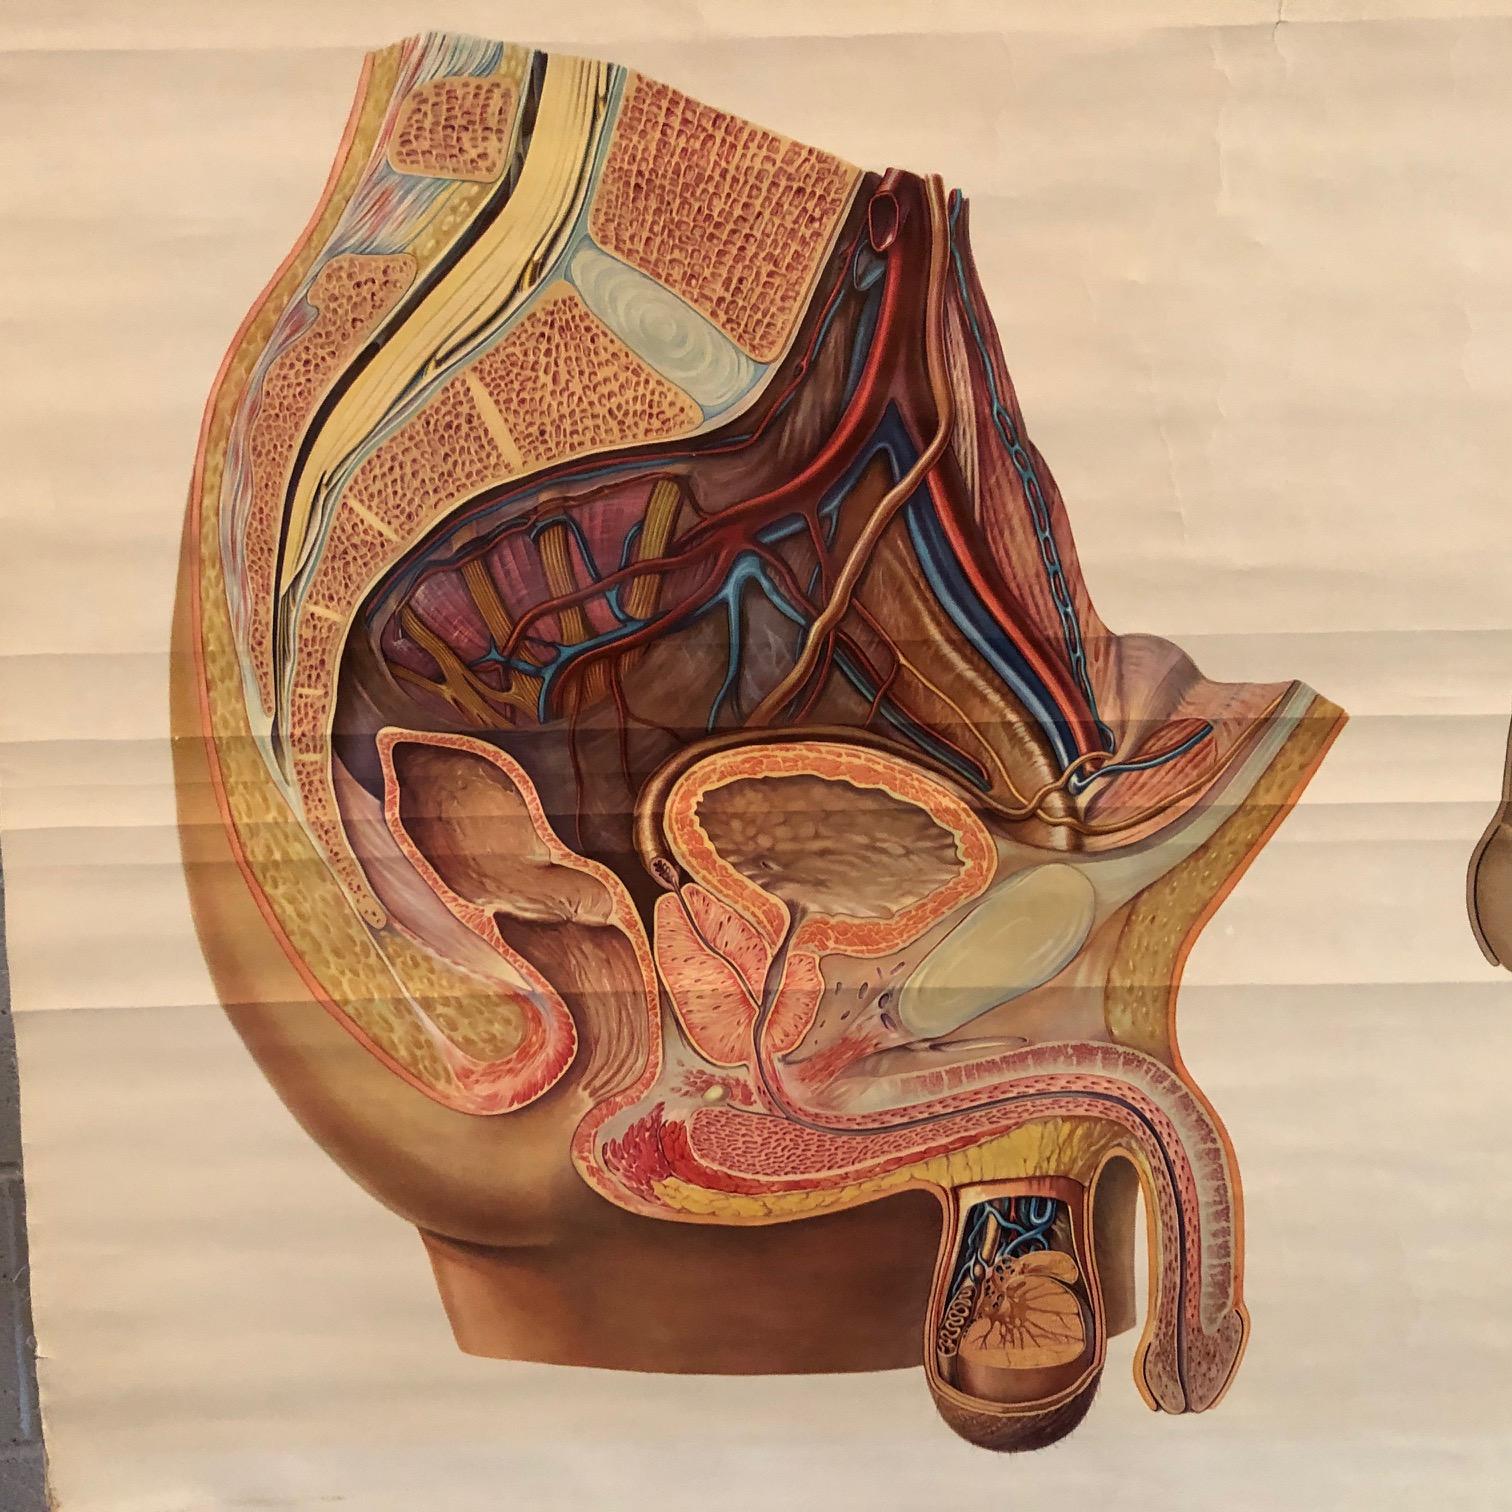 German Educational Male Pelvic Organs Anatomy Chart In Good Condition For Sale In Brooklyn, NY